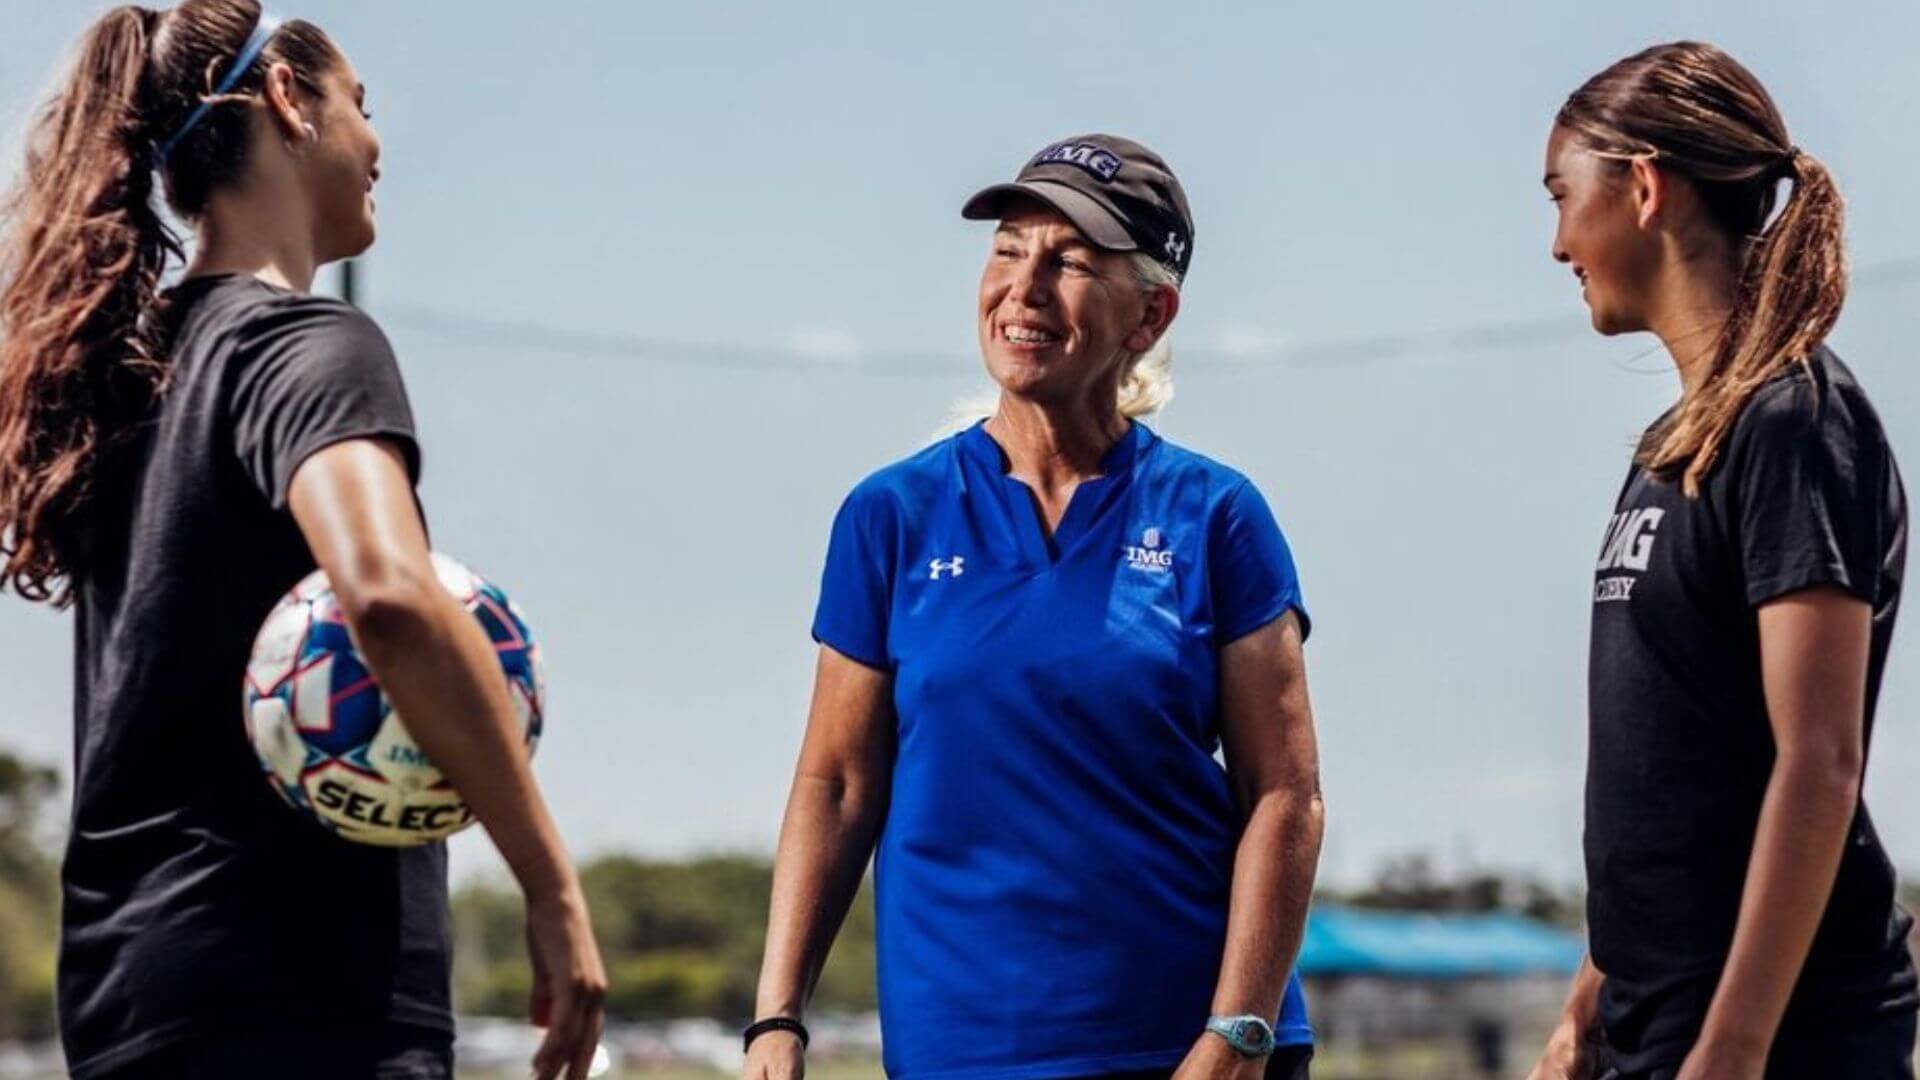 Kim Dean from IMG Academy is one the women coaching girls we highlight in our list